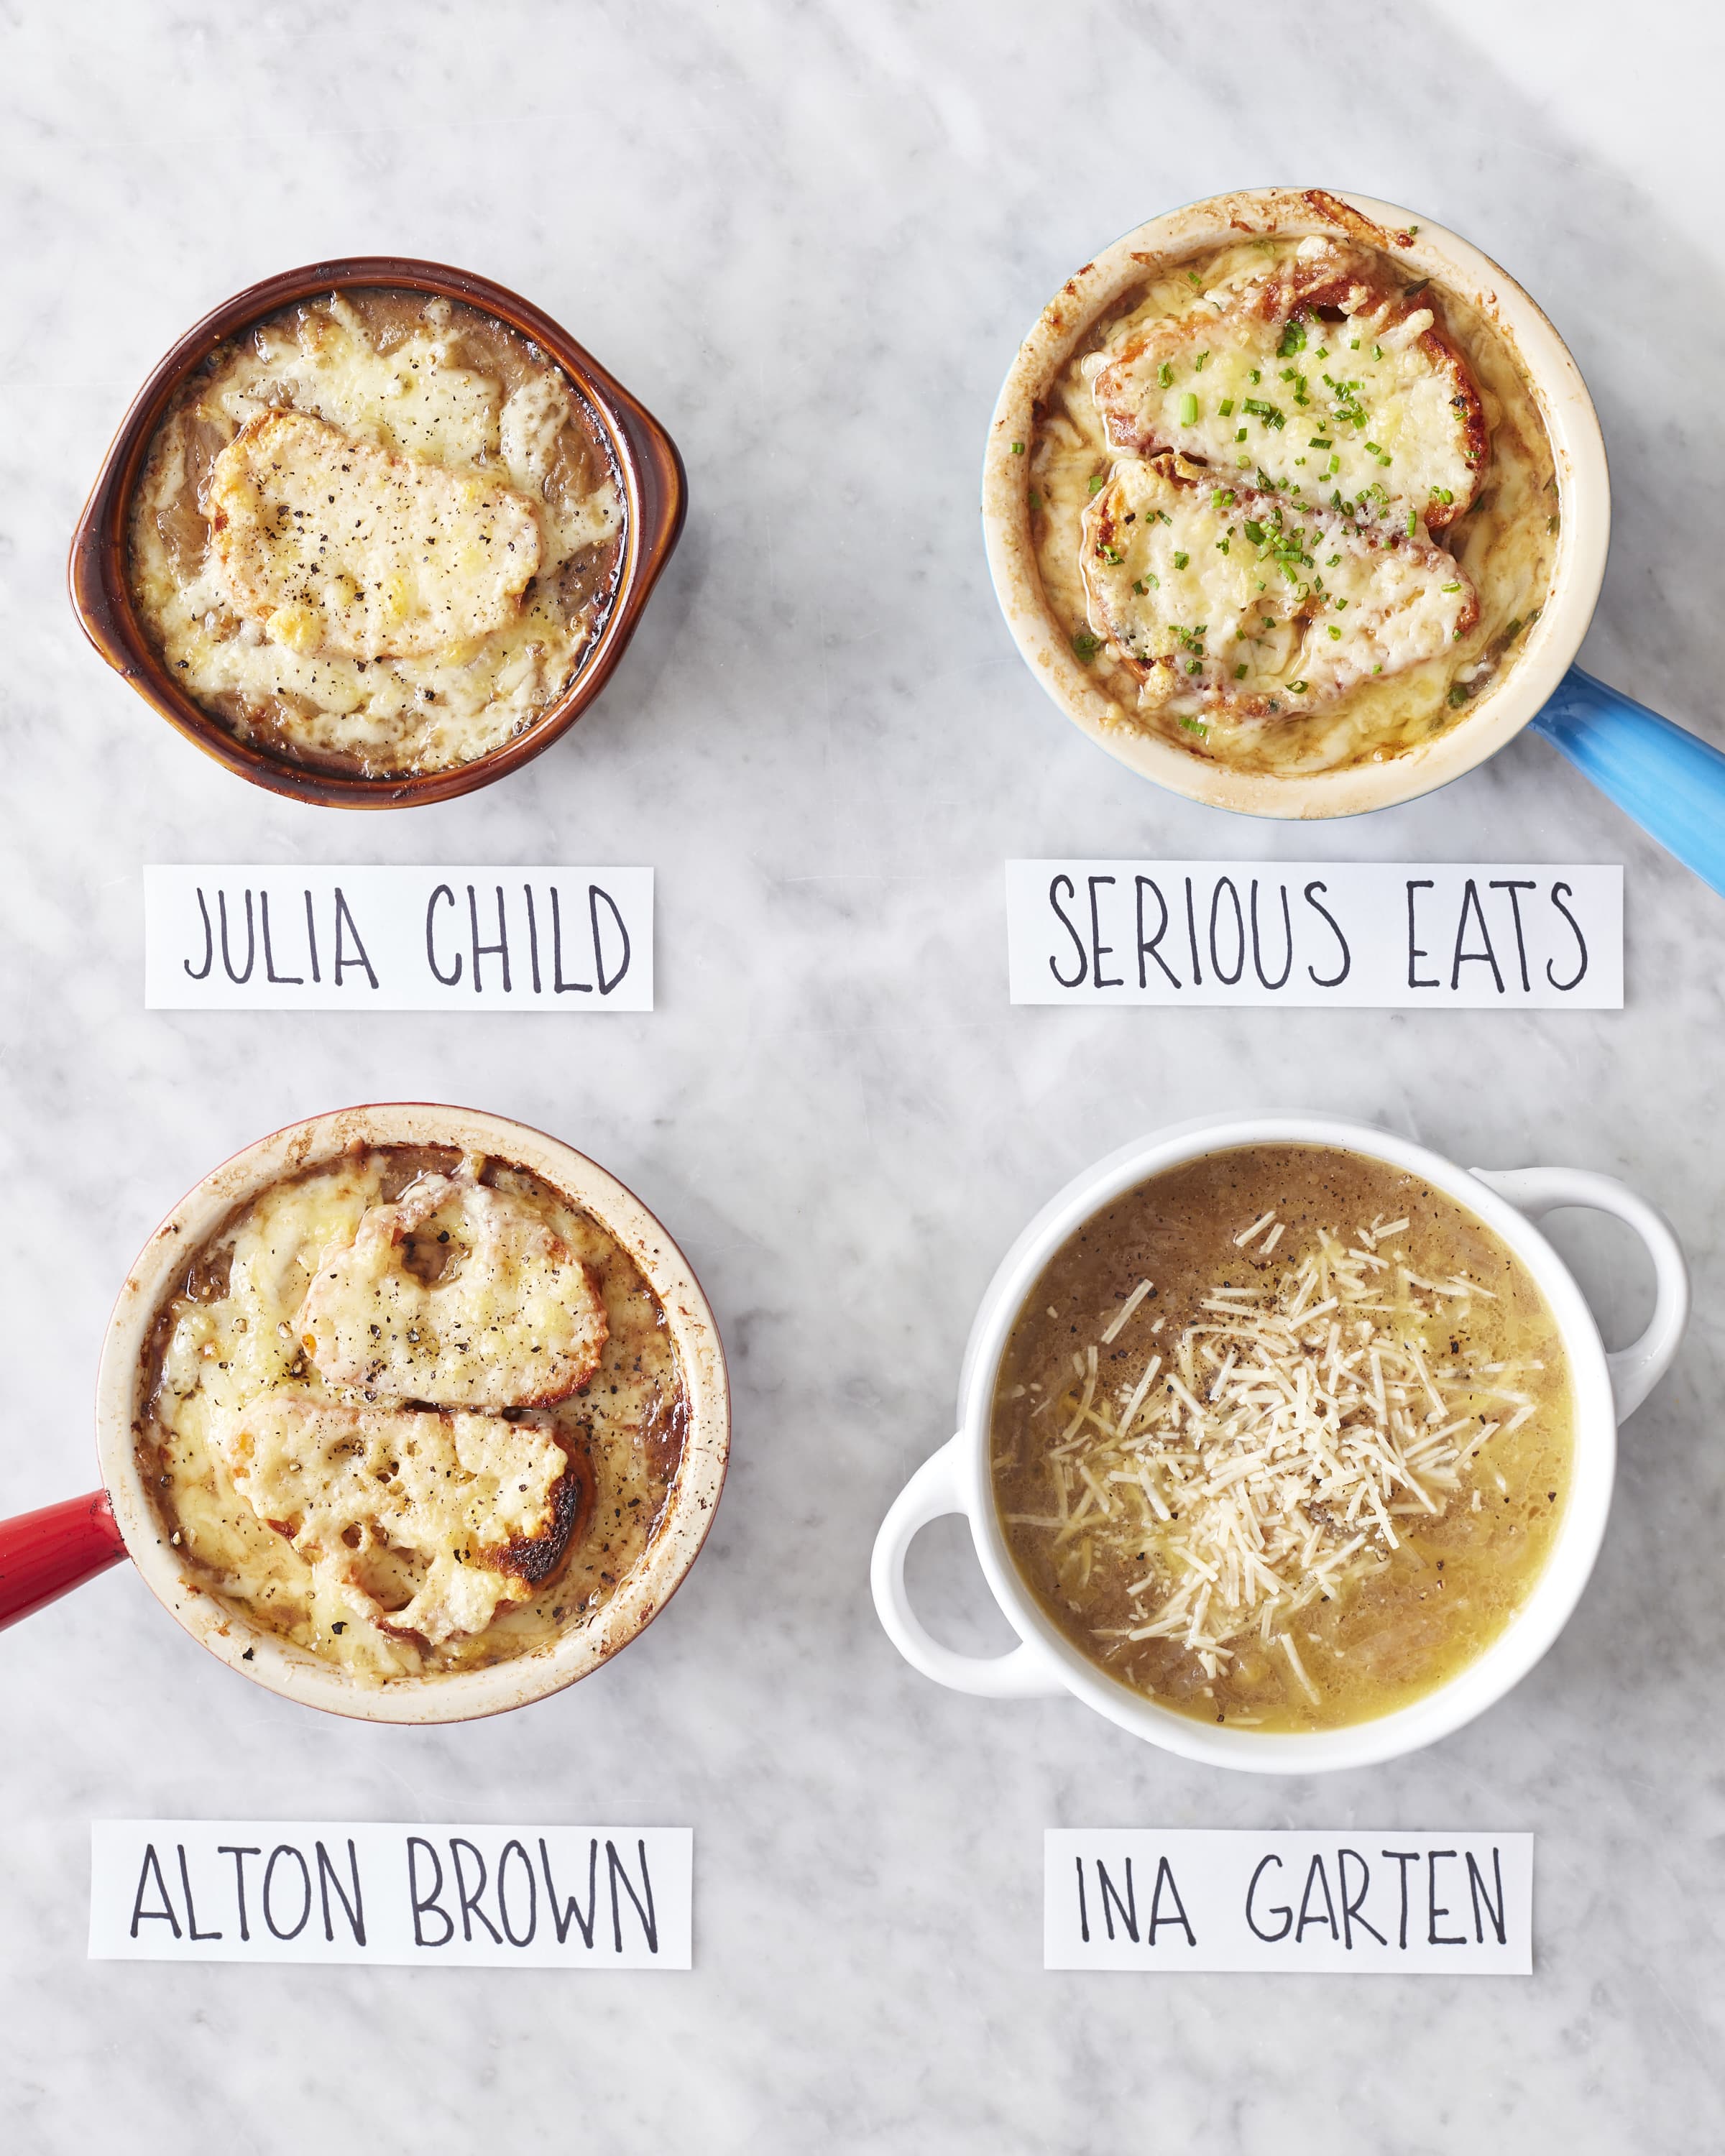 We Tried Celebrity Chef French Onion Soup Recipes - Here's the Best